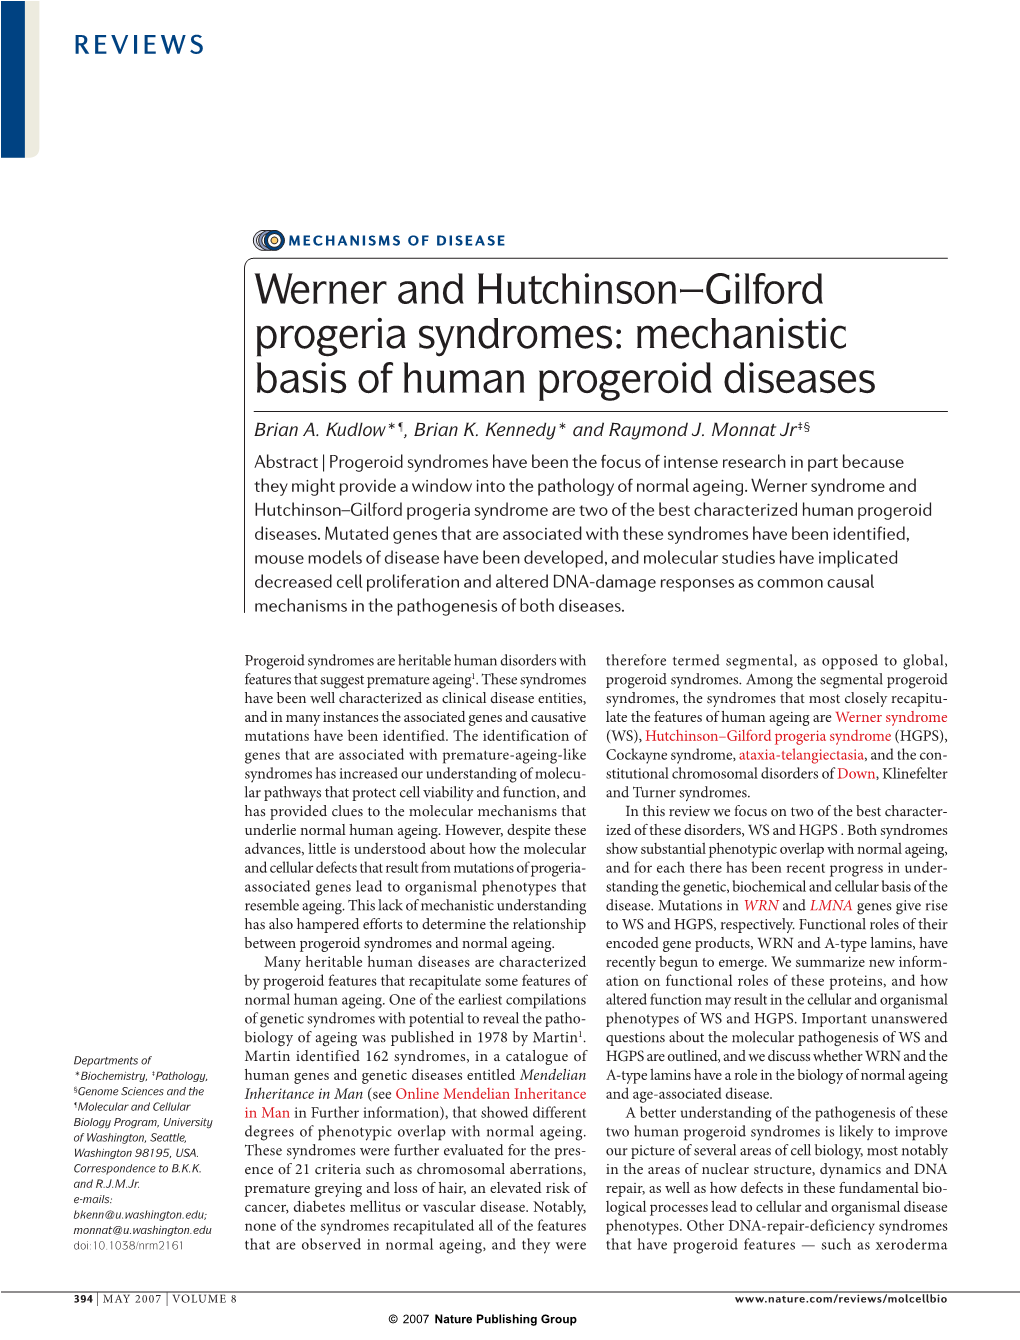 Werner and Hutchinson–Gilford Progeria Syndromes: Mechanistic Basis of Human Progeroid Diseases